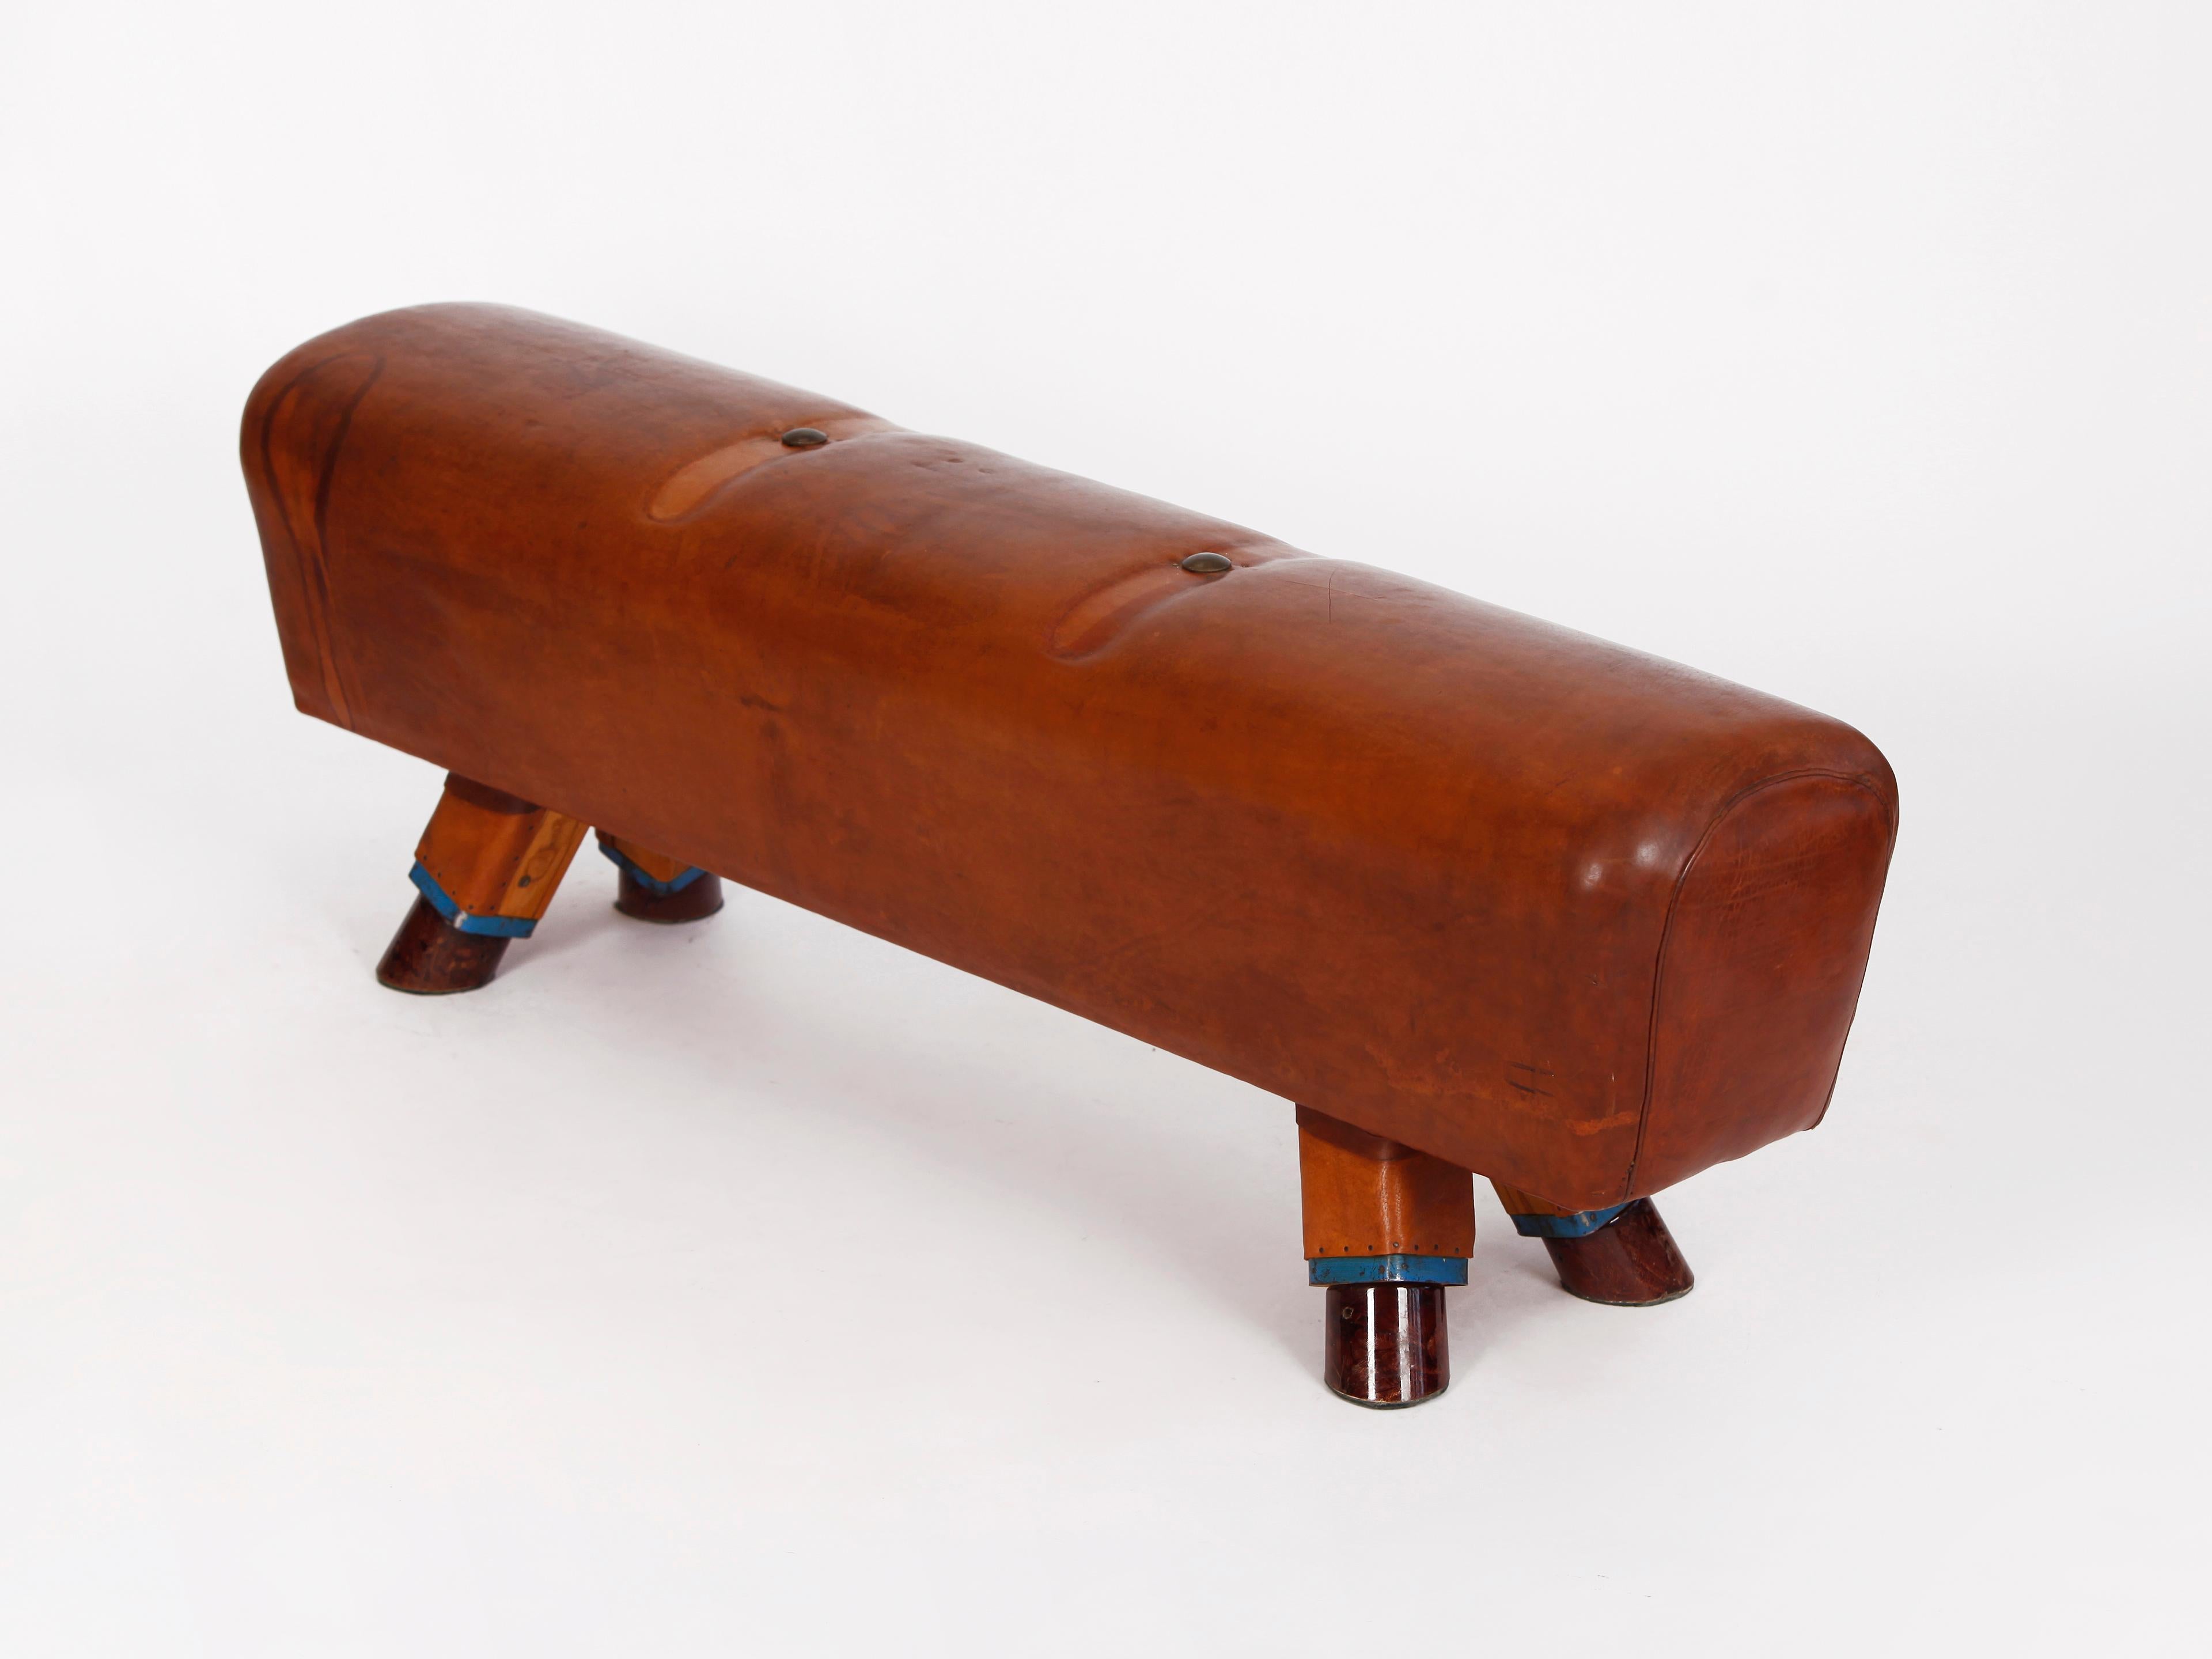 Czech Gymnastic Leather Pommel Horse Bench with Wooden Handles, 1930s